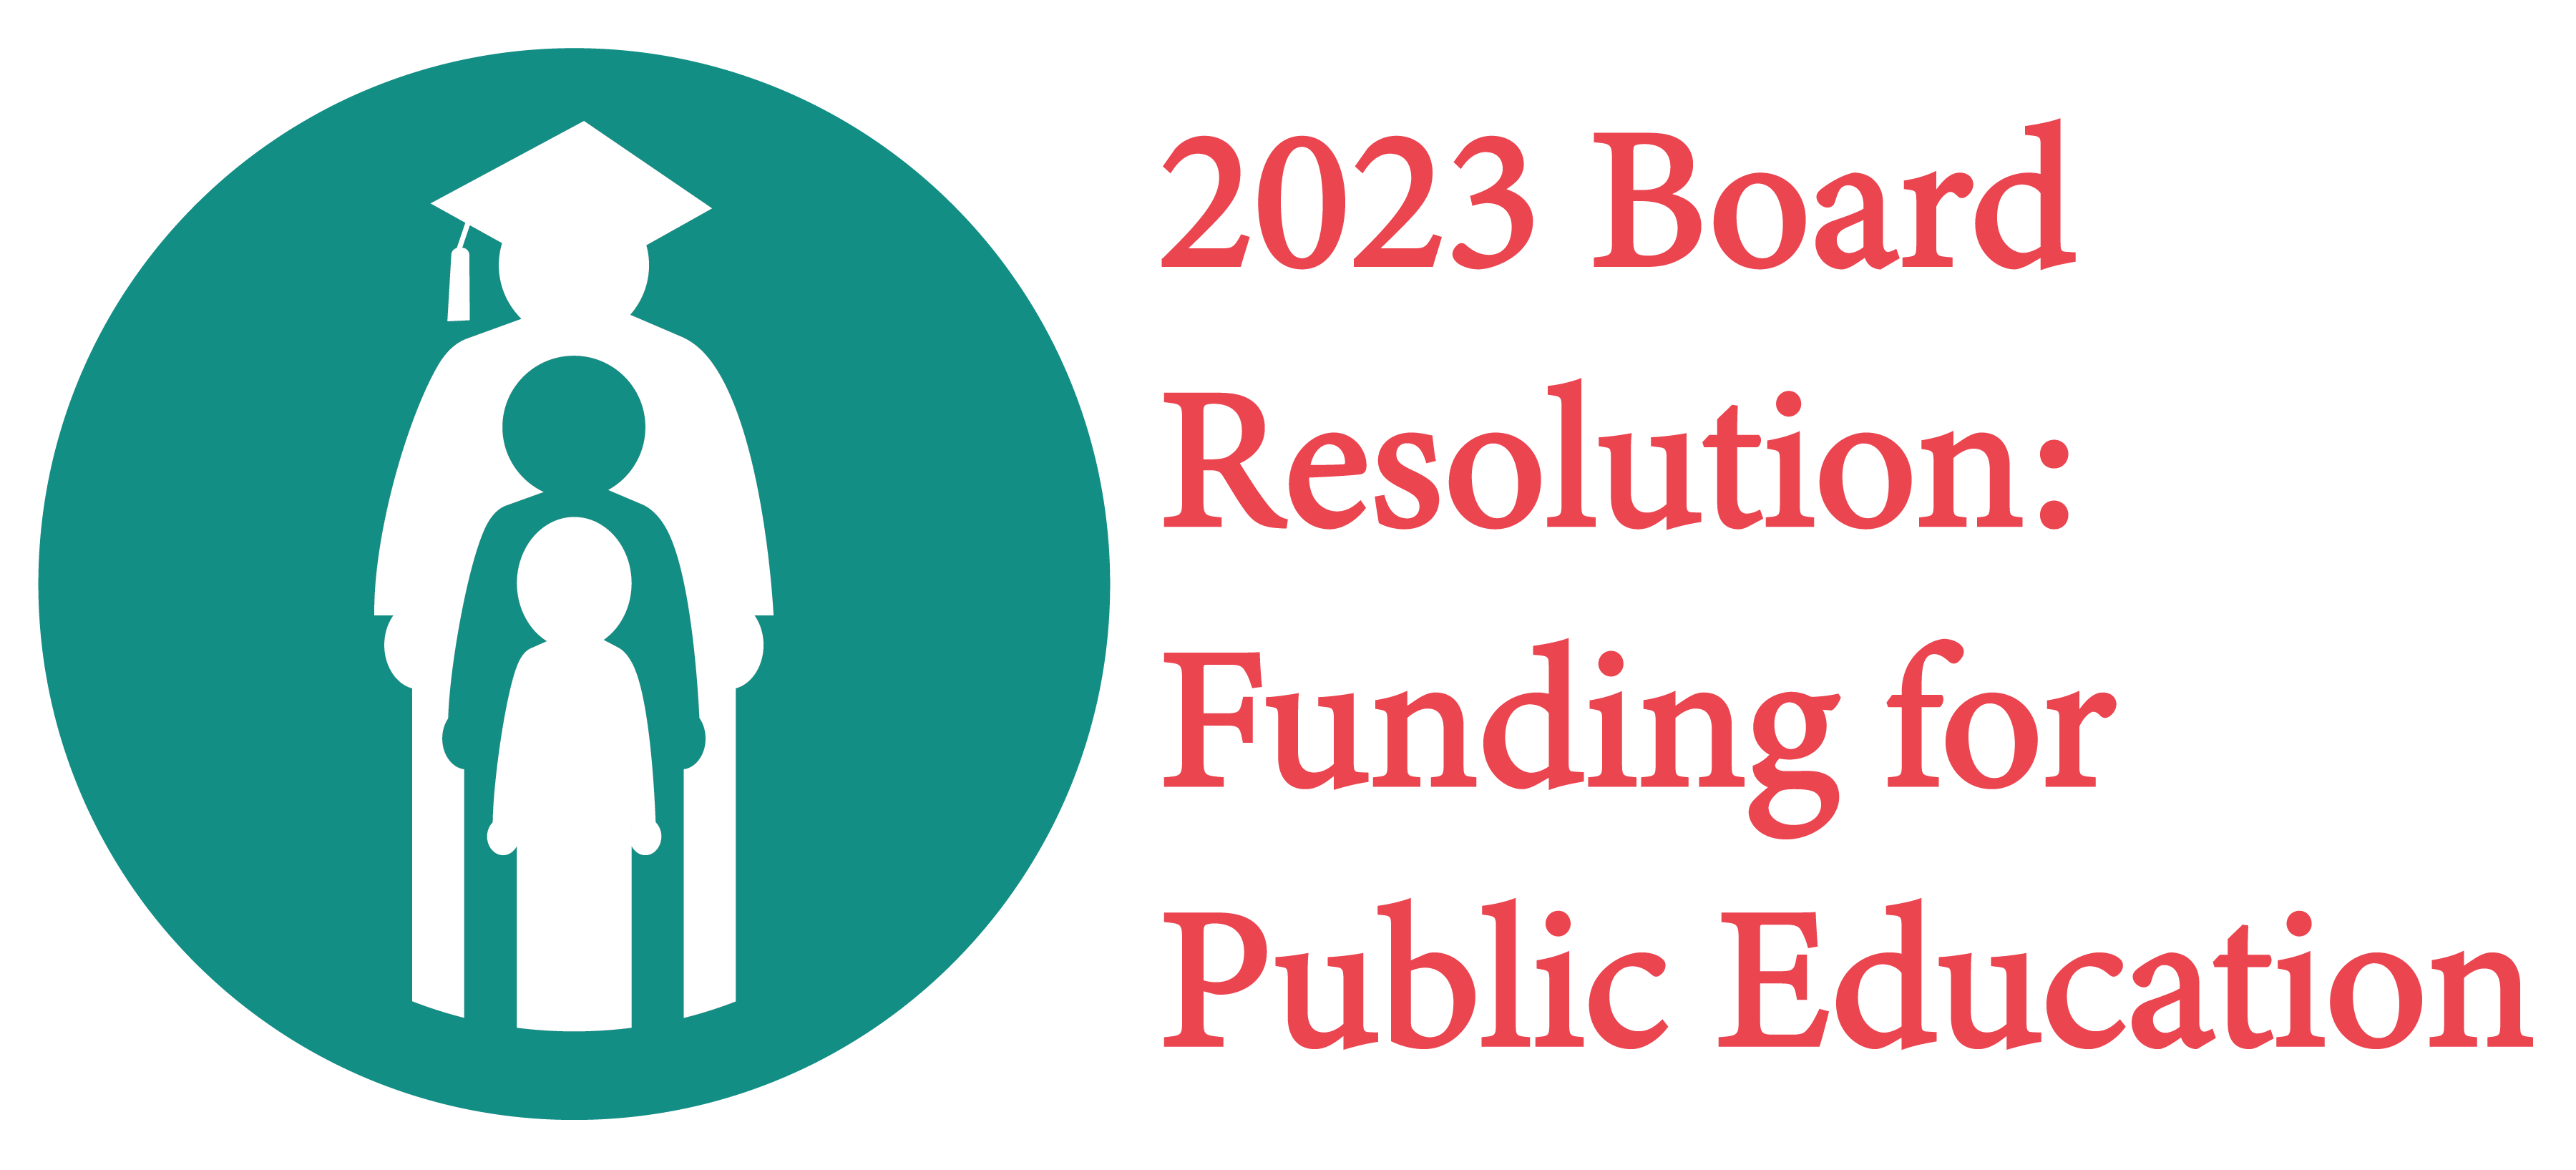 2023 Board Resolution: Funding for Public Education